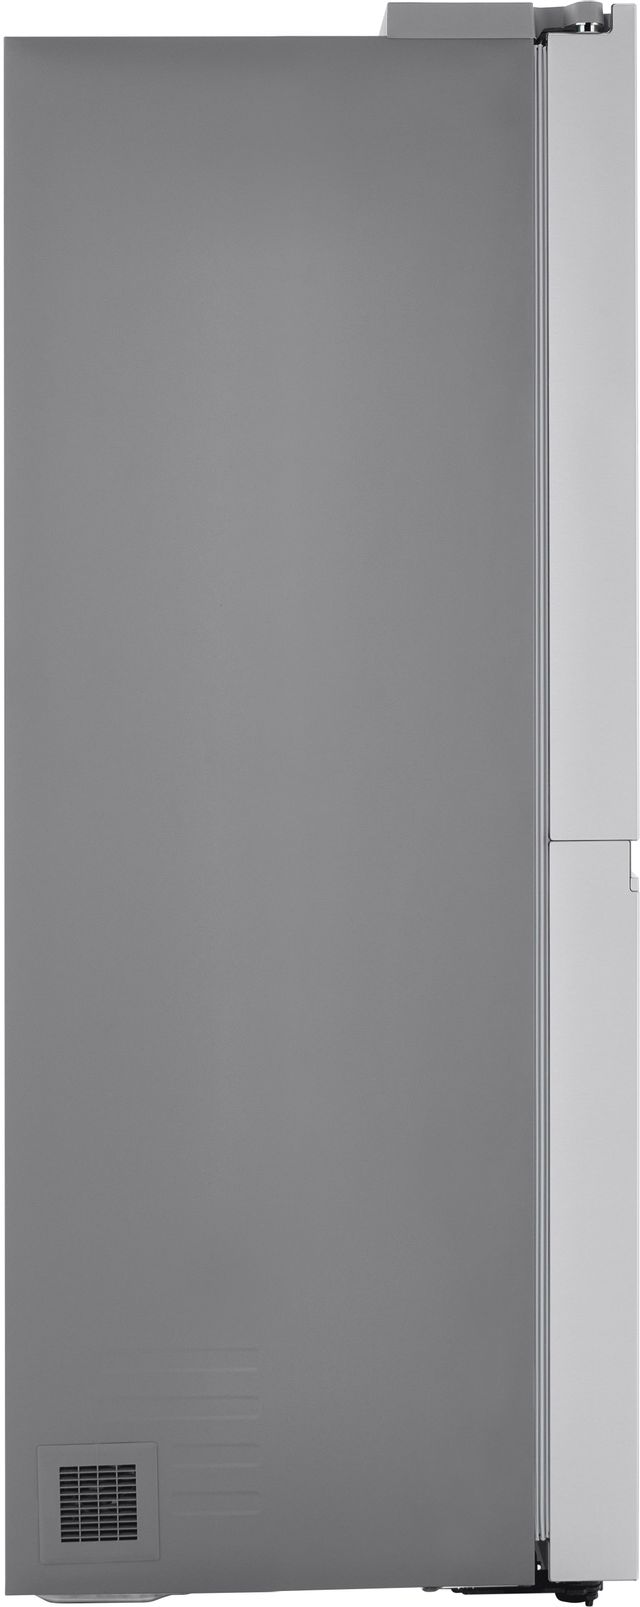 LG 23 Cu. Ft. Stainless Steel Side-by-Side Refrigerator 18